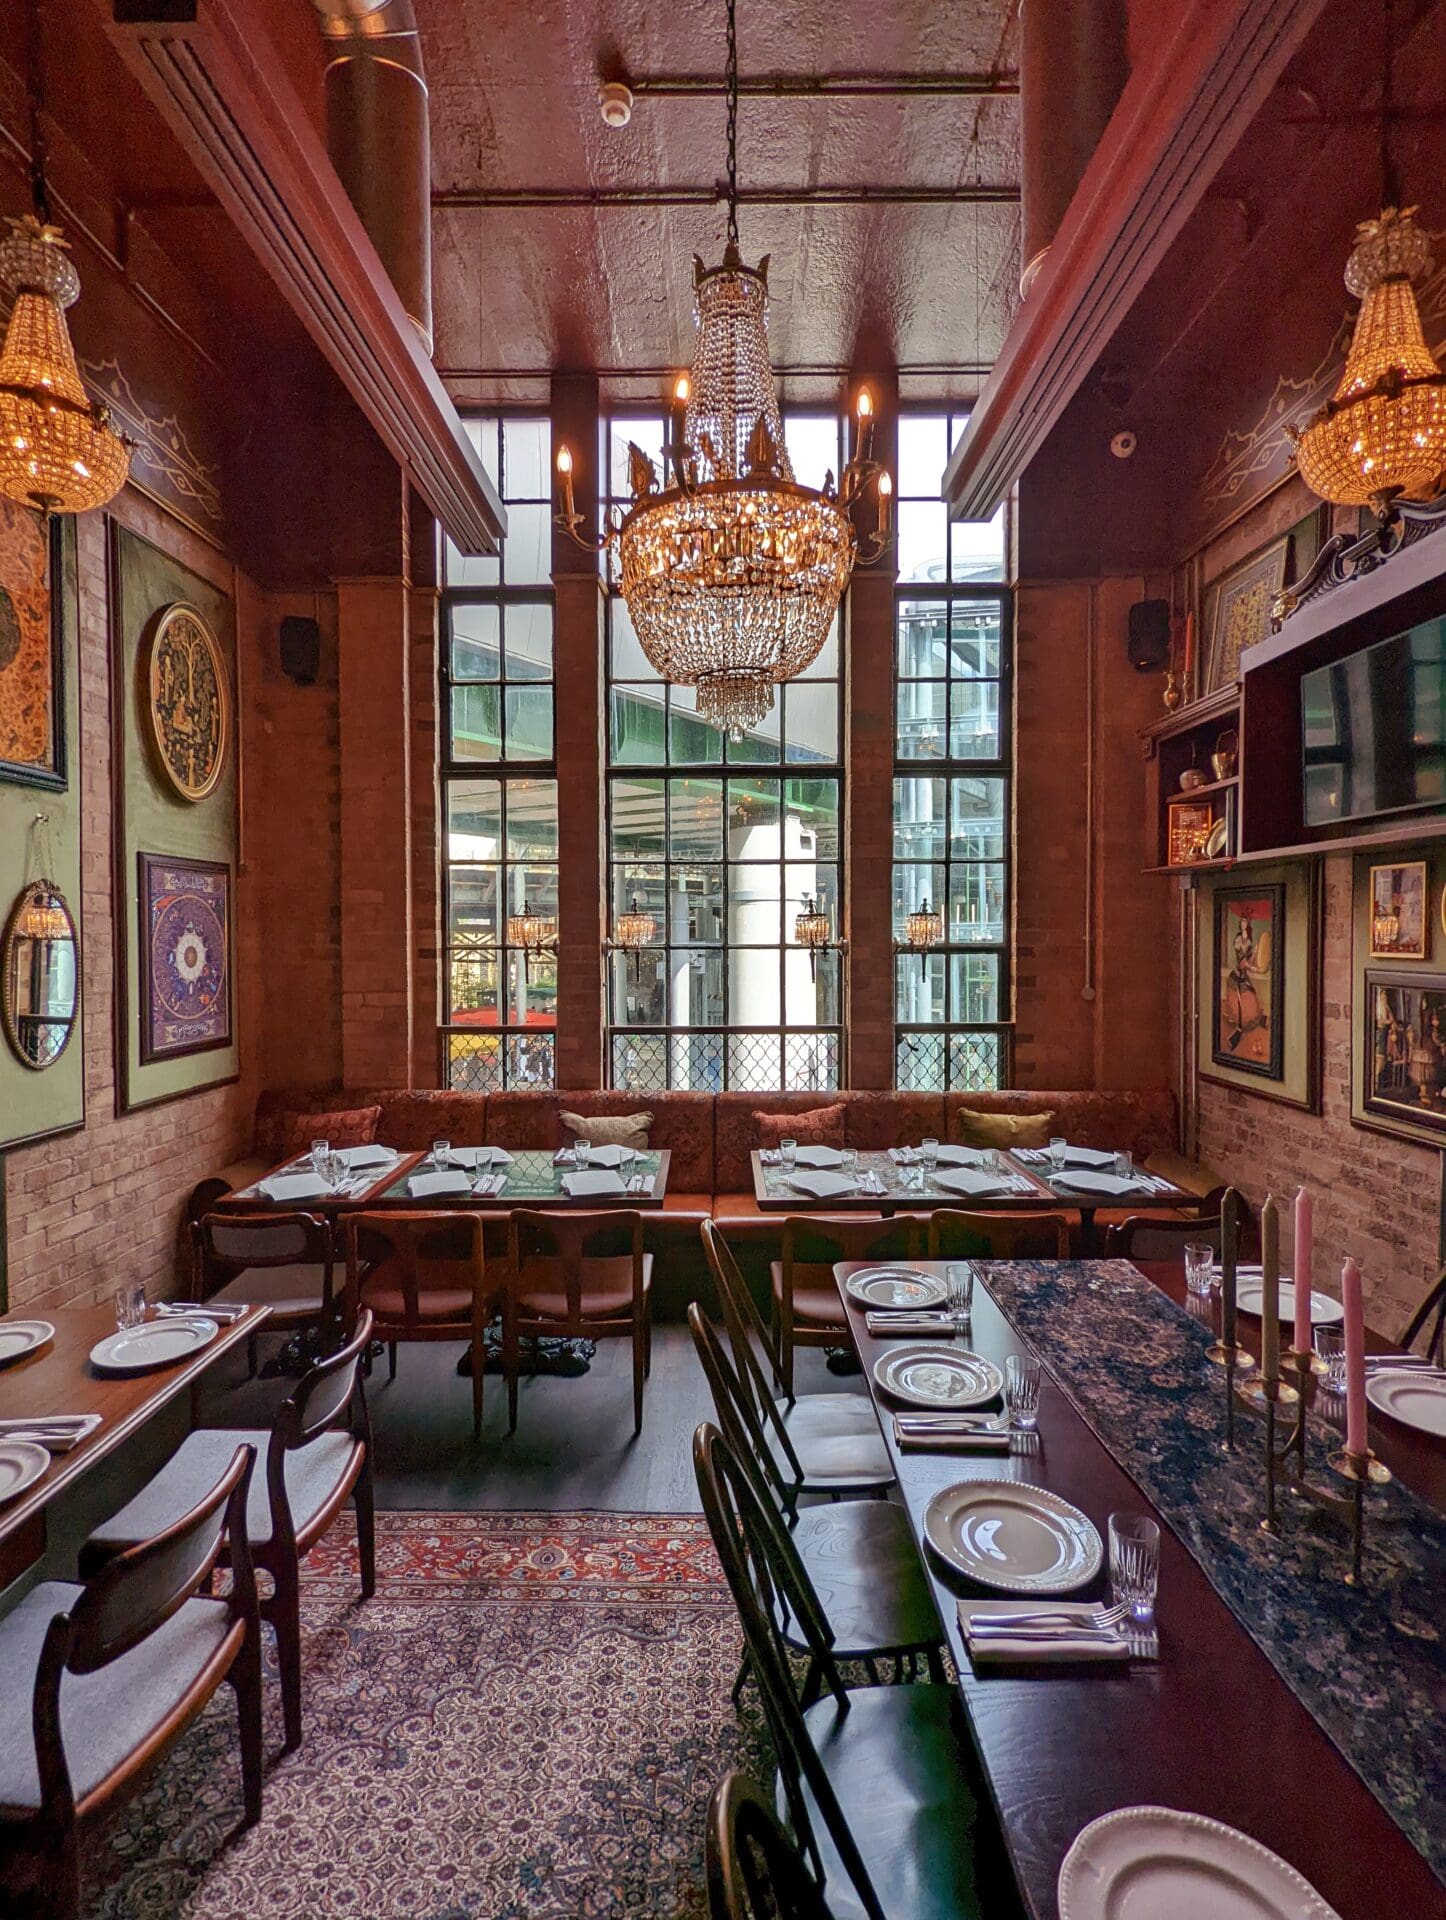 Best restaurants in London Bridge and Borough | The dining room at Berenjak, with artwork adorning the walls and Persian rugs over the floors